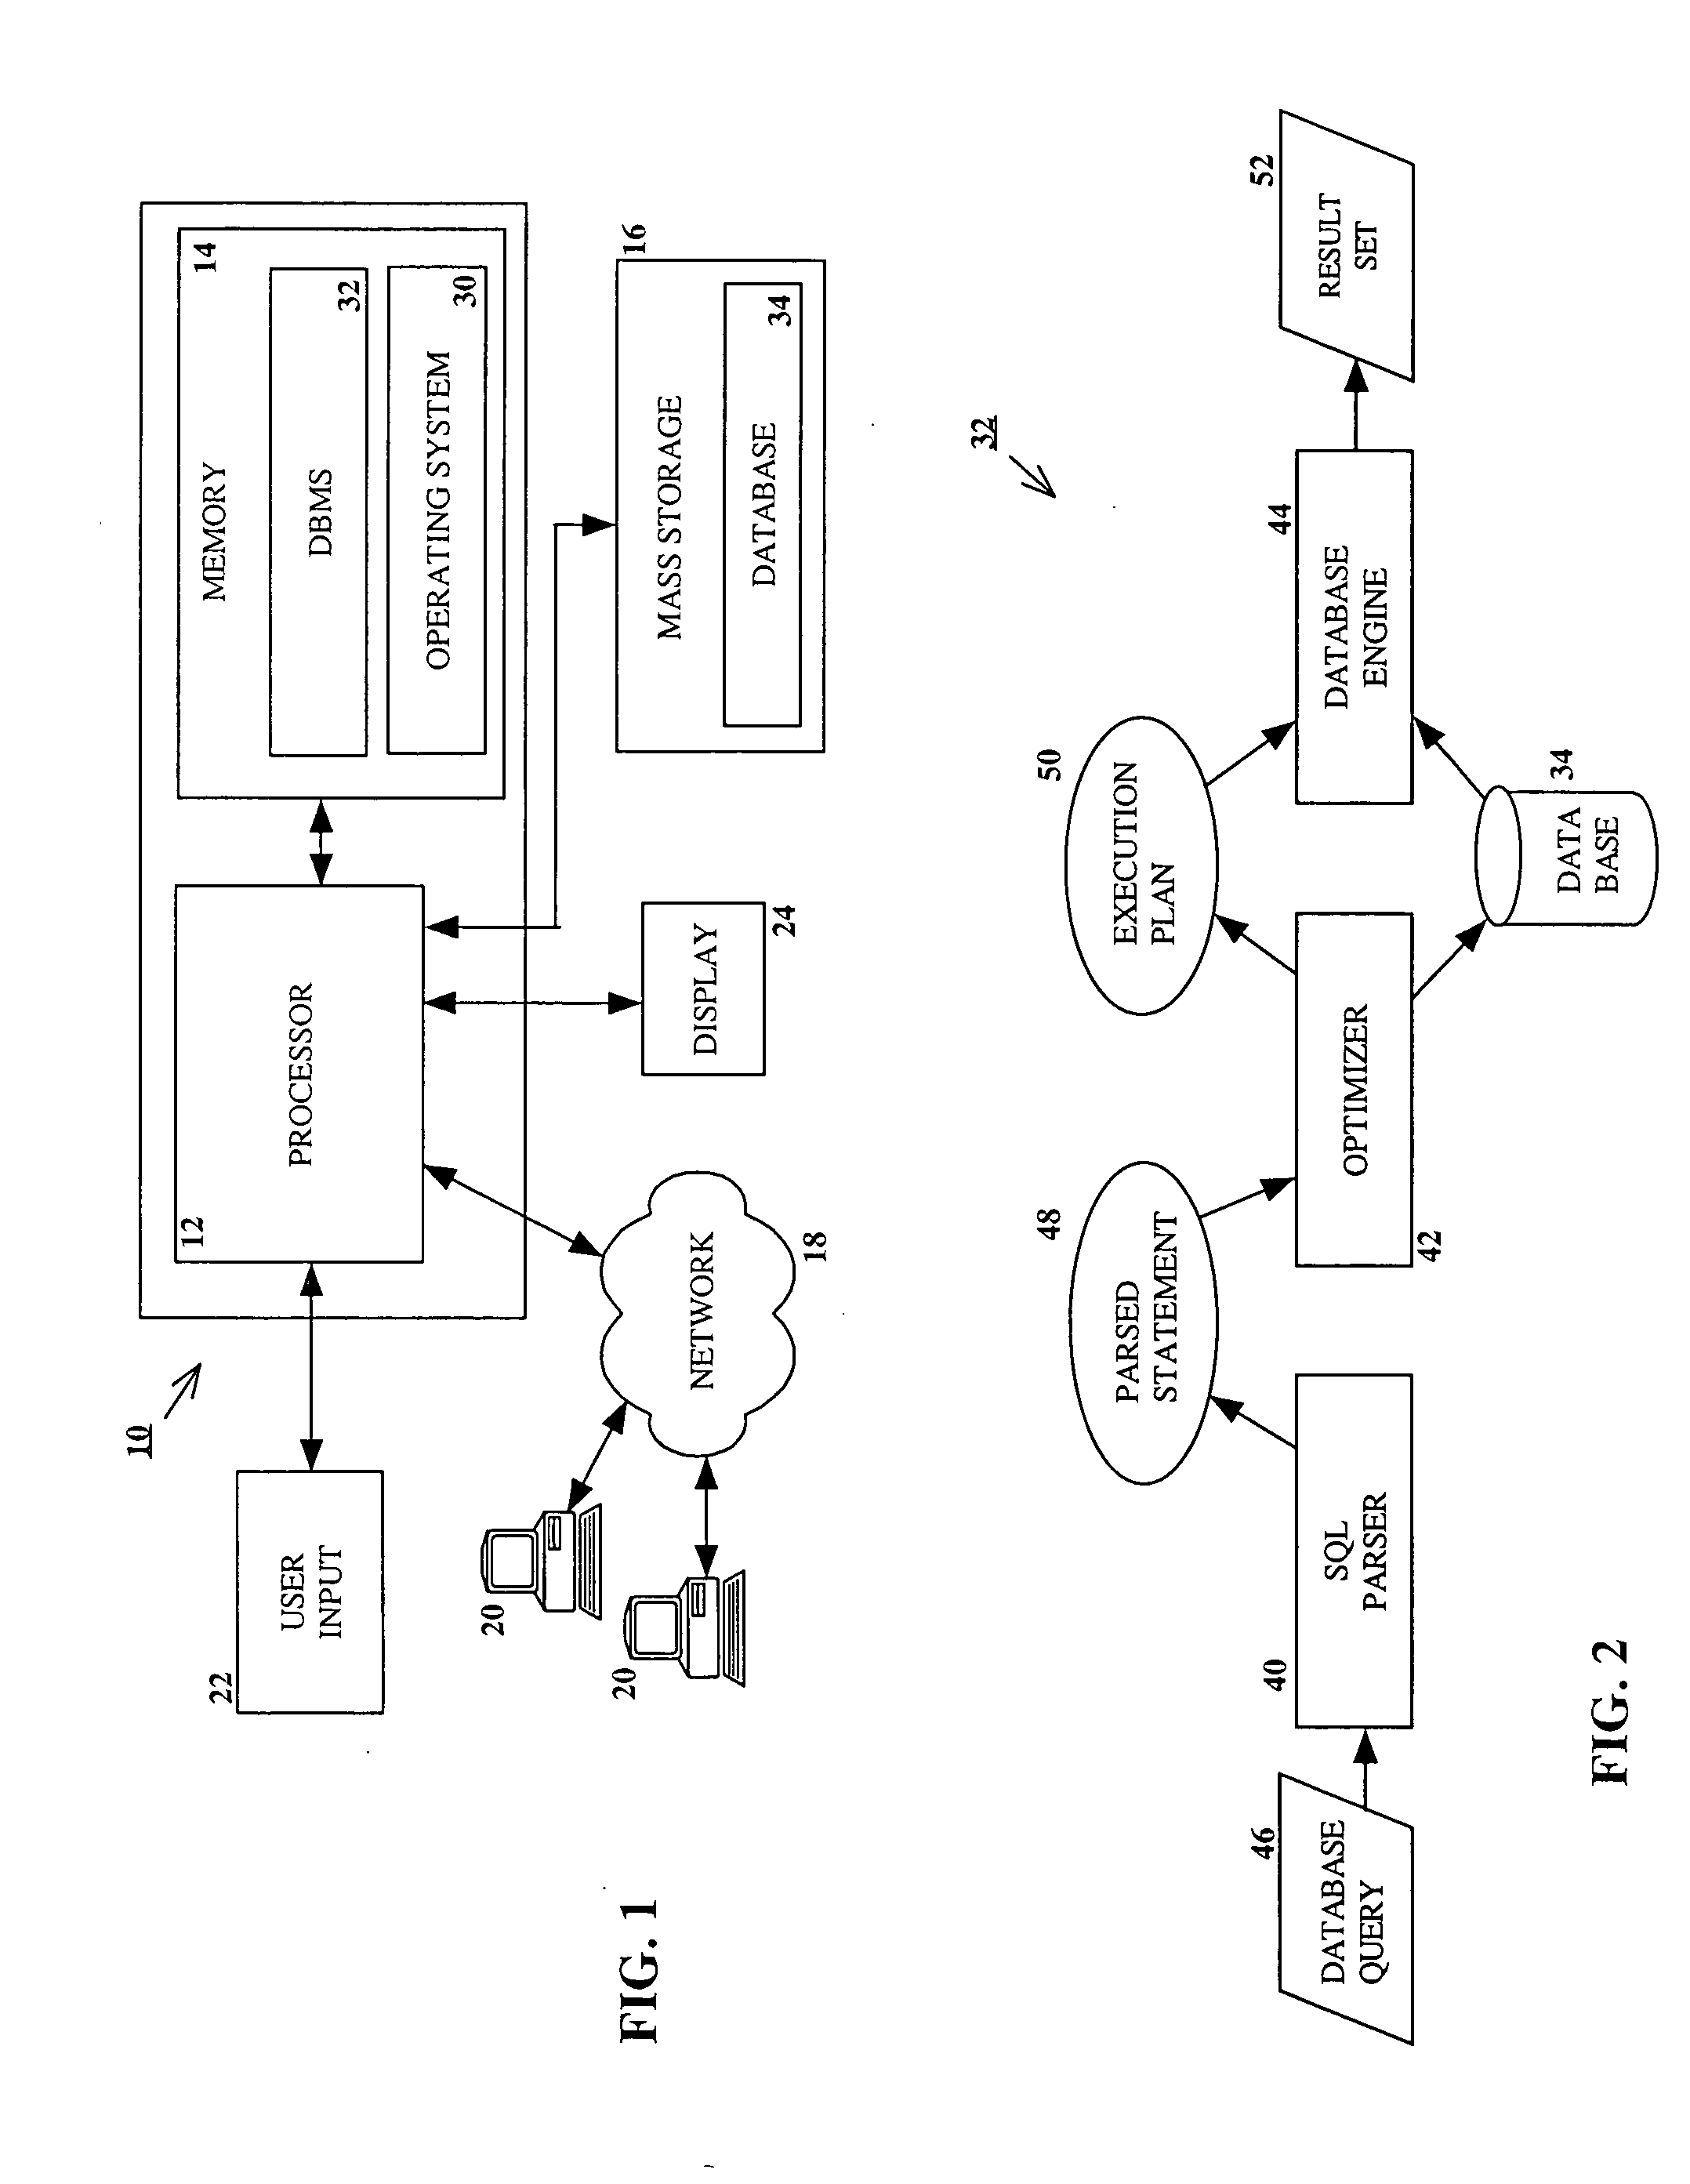 Method and system for providing referential integrity constraints